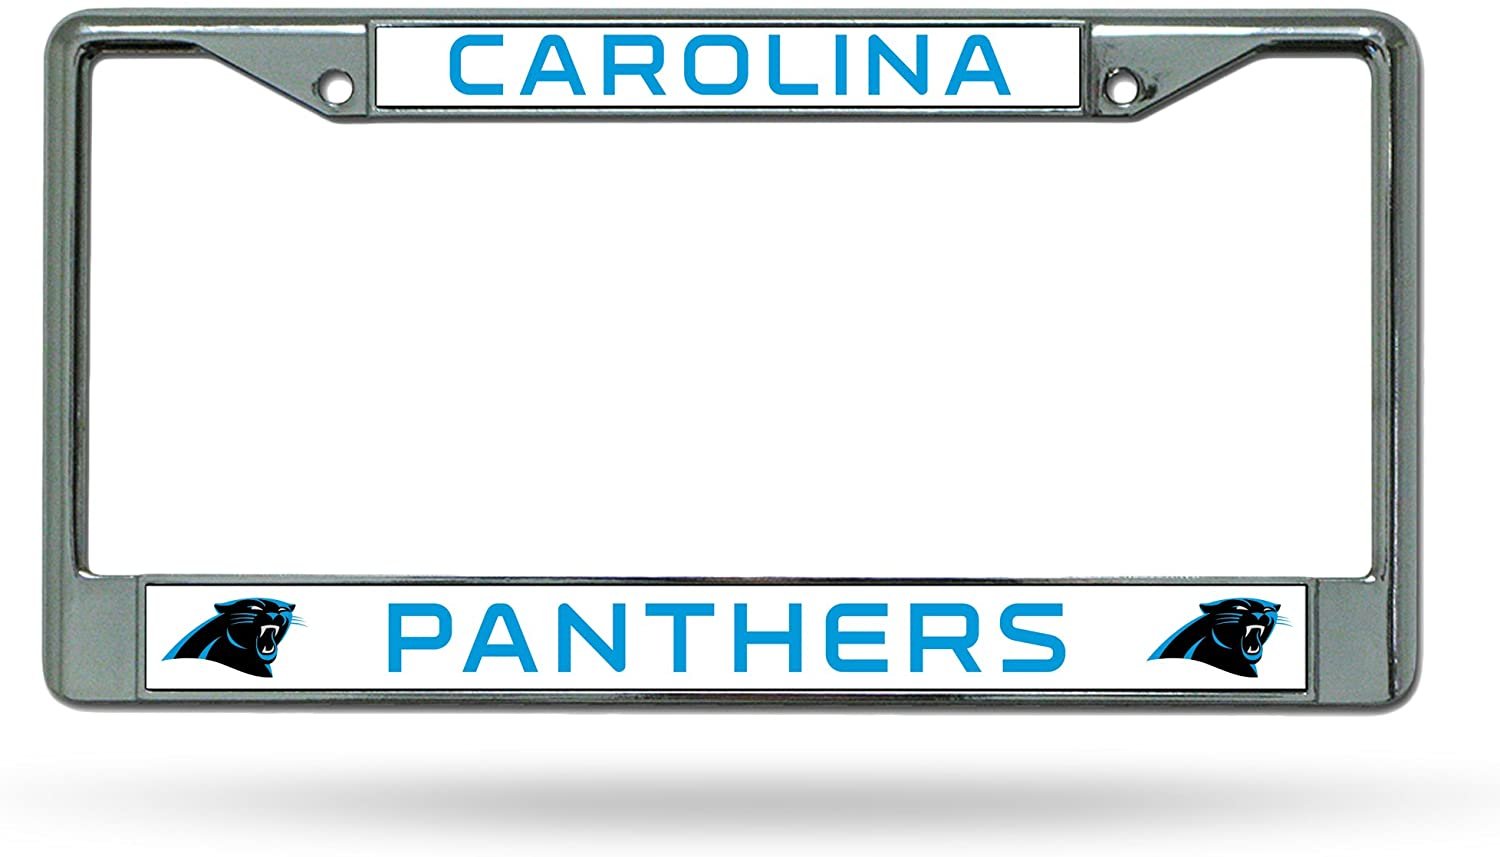 Carolina Panthers Premium Metal License Plate Frame Chrome Tag Cover, 12x6 Inch